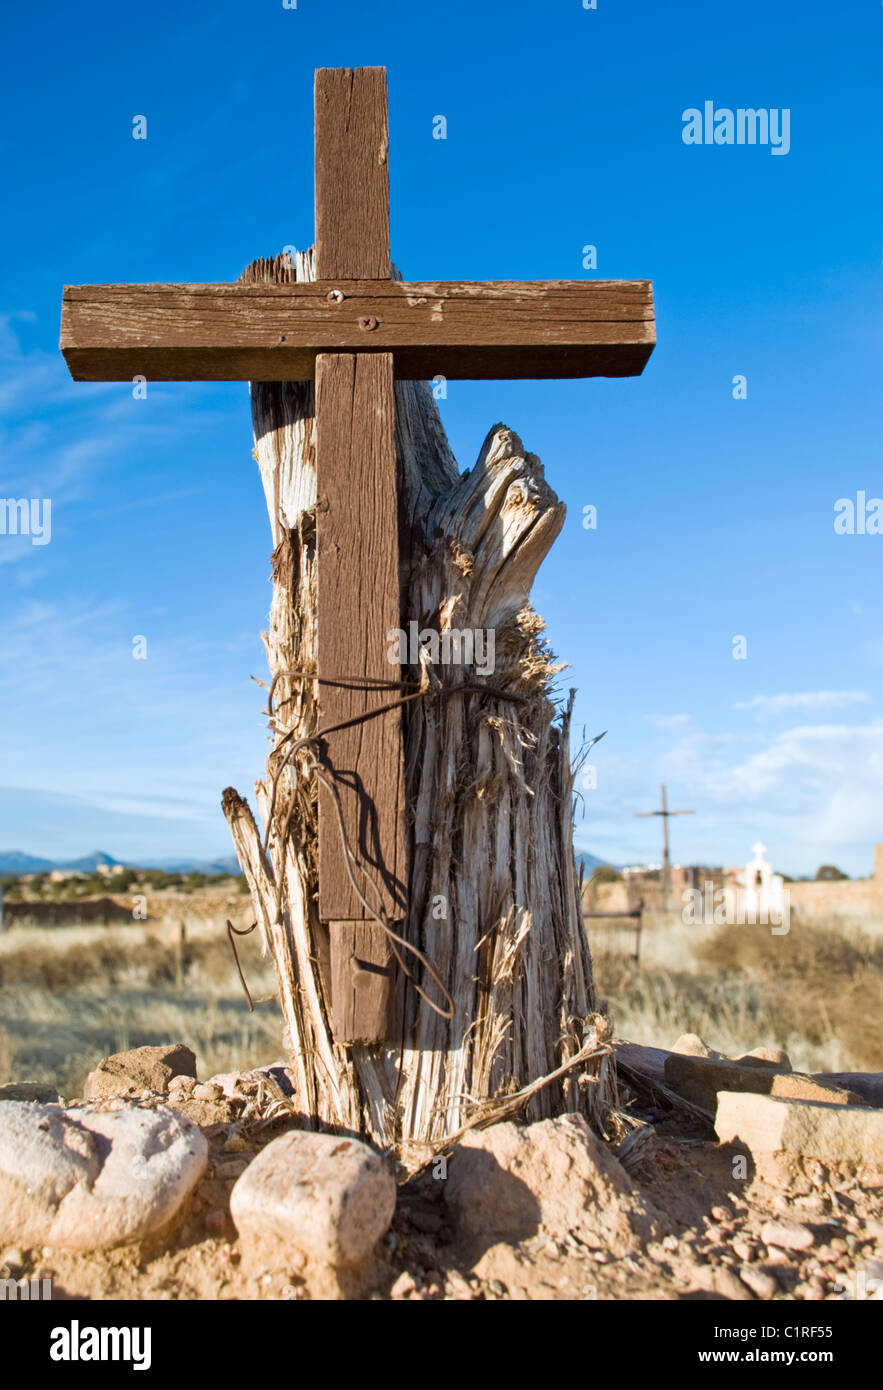 A wooden cross stands at the entrance to a remote cemetery in Galisteo, New Mexico. Stock Photo